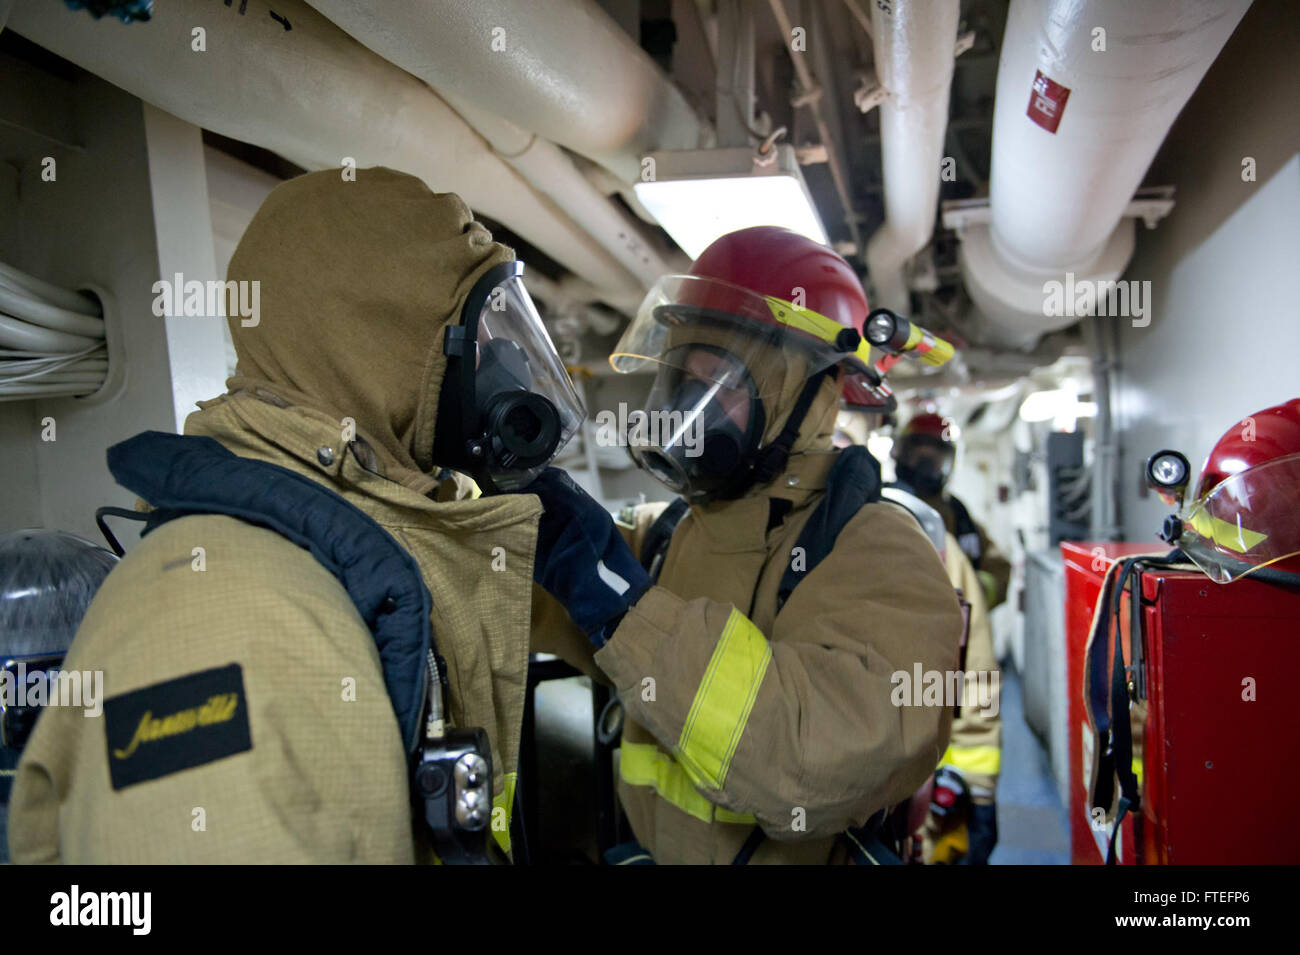 140809-N-ZE250-085  BLACK SEA (Aug. 9, 2014) Sailors check each other’s firefighting equipment during a damage control exercise aboard the Ticonderoga-class guided-missile cruiser USS Vella Gulf (CG 72). Vella Gulf, homeported in Norfolk, Va., is conducting naval operations with allies in the U.S. 6th Fleet area of operations in order to advance security and stability in Europe. (U.S. Navy photo by Mass Communication Specialist 3rd Class Weston Jones/Released) Stock Photo